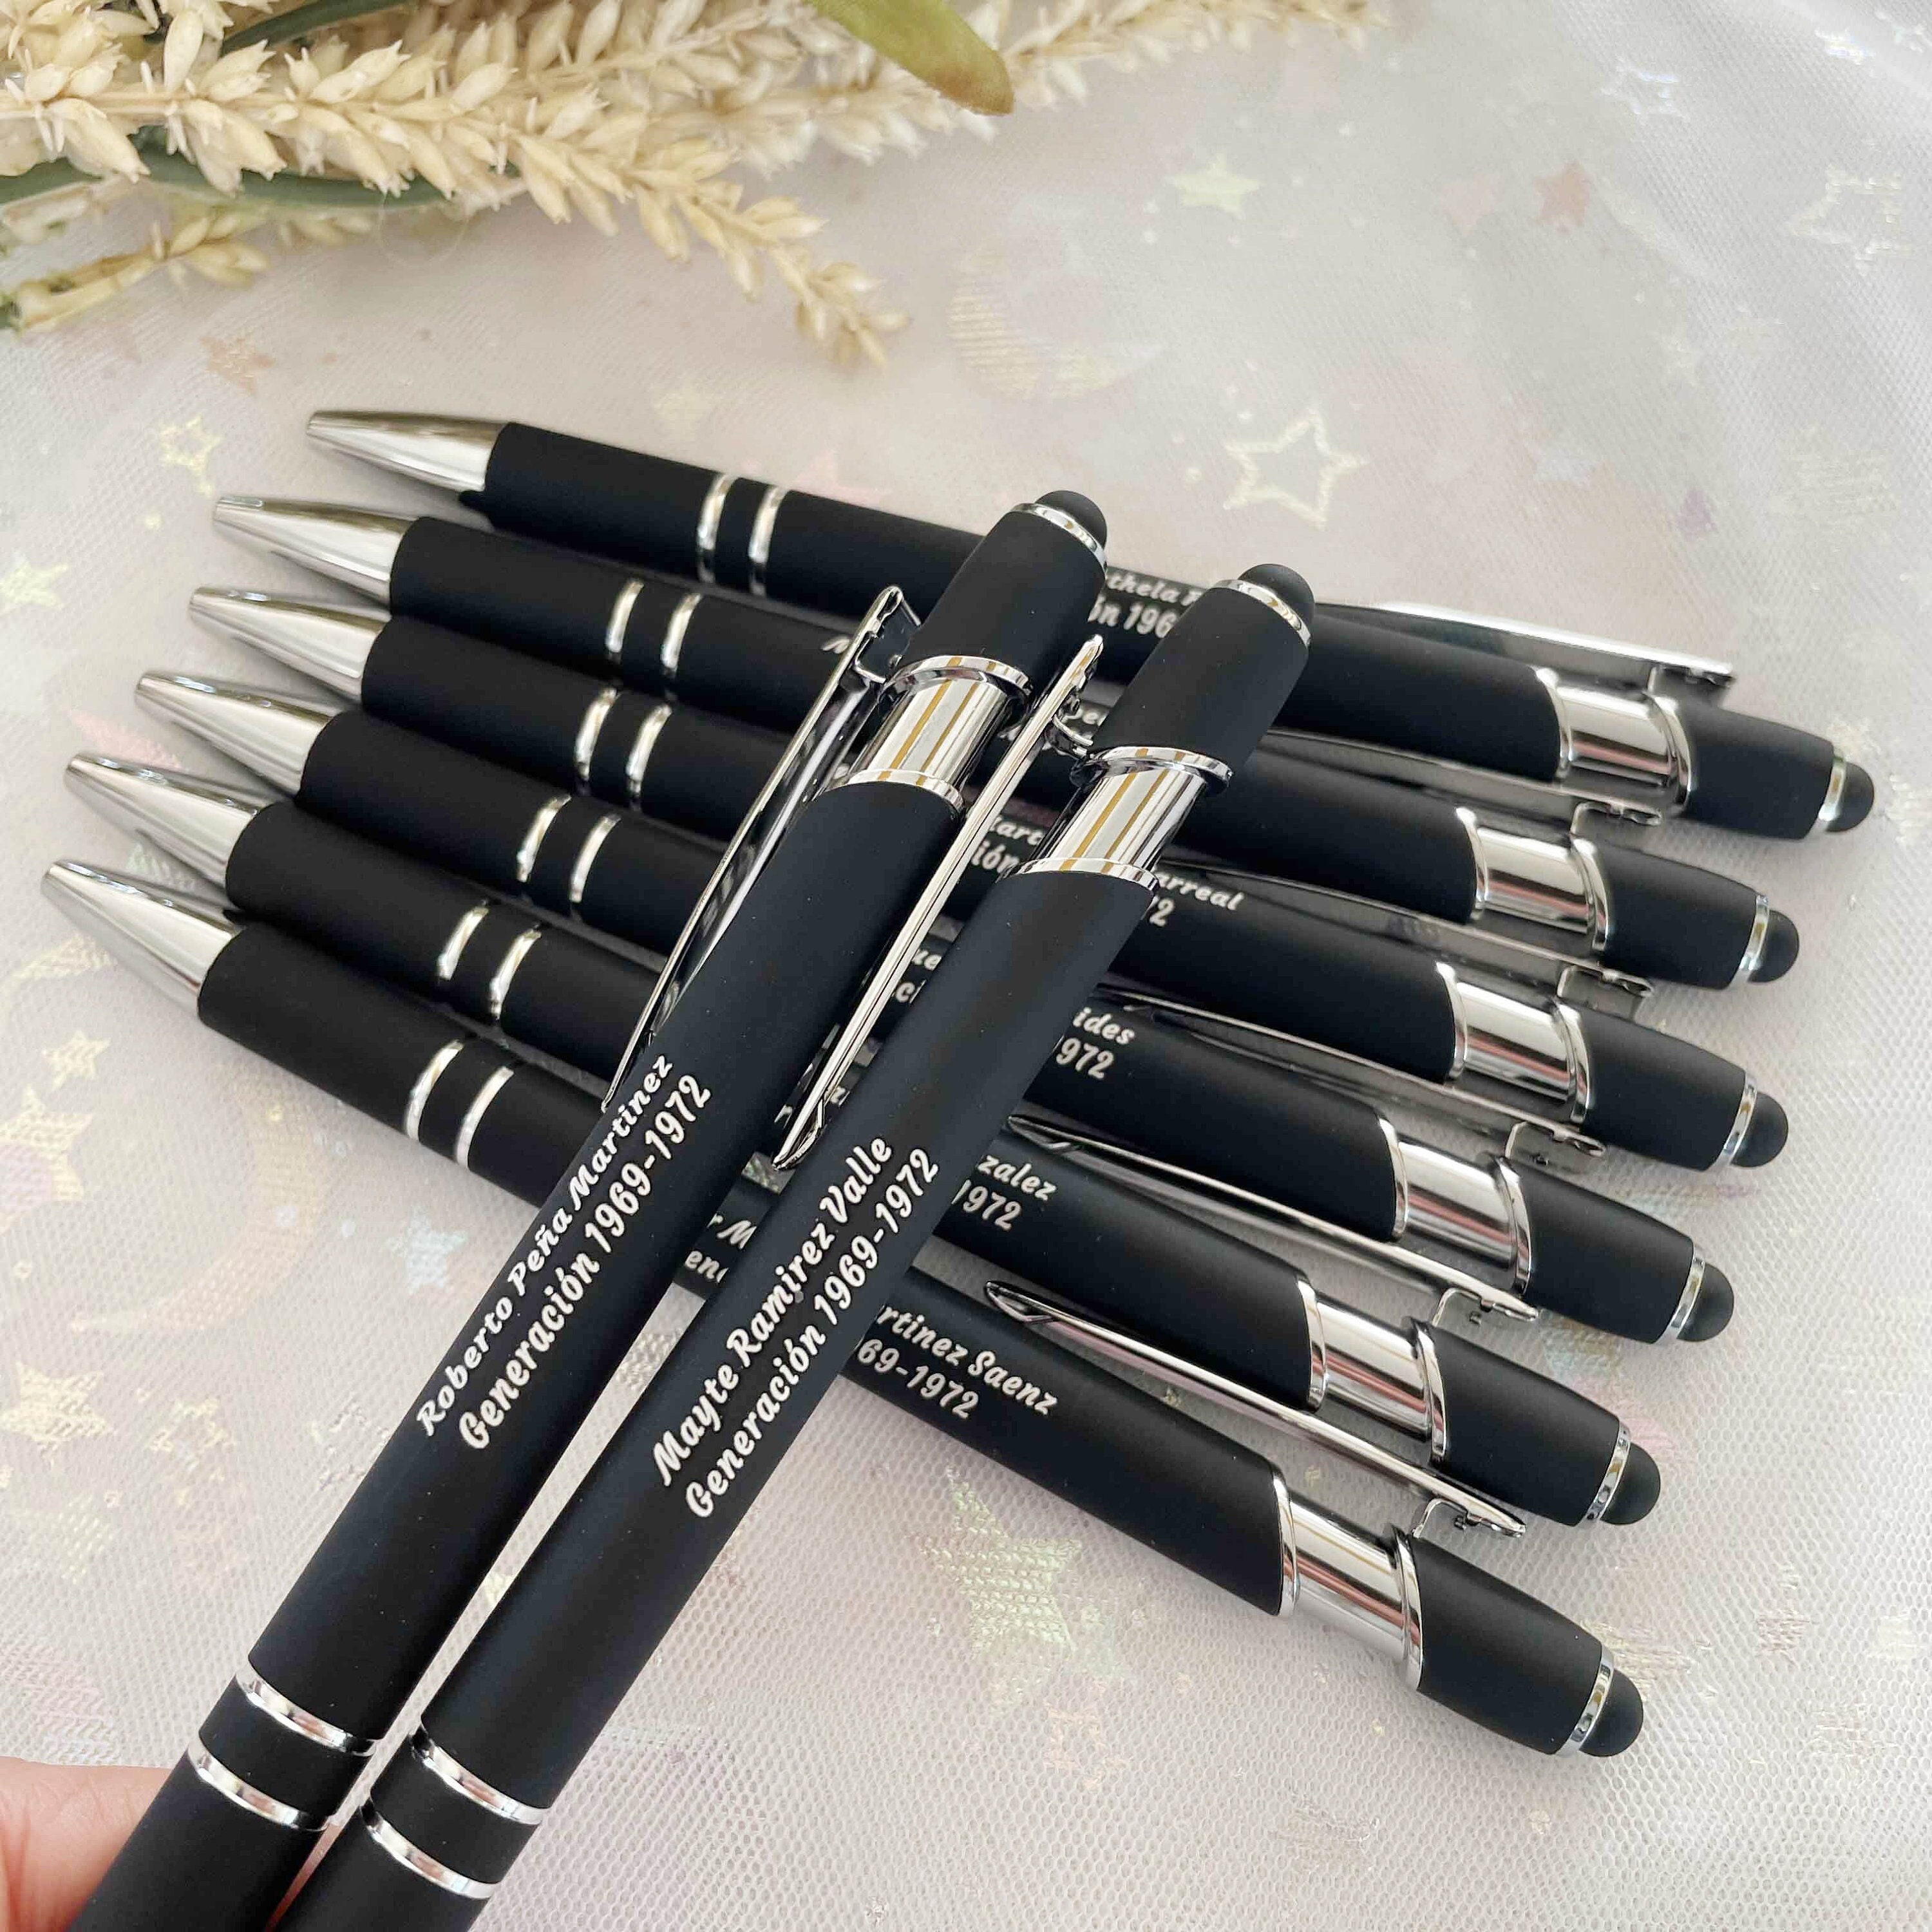  QNTYCT Custom ballpoint pen, personalized ballpoint pen with  name, soft-touch ballpoint pen, best pen for Christmas, graduation,  anniversary, office, smooth writing-12 pc : Office Products